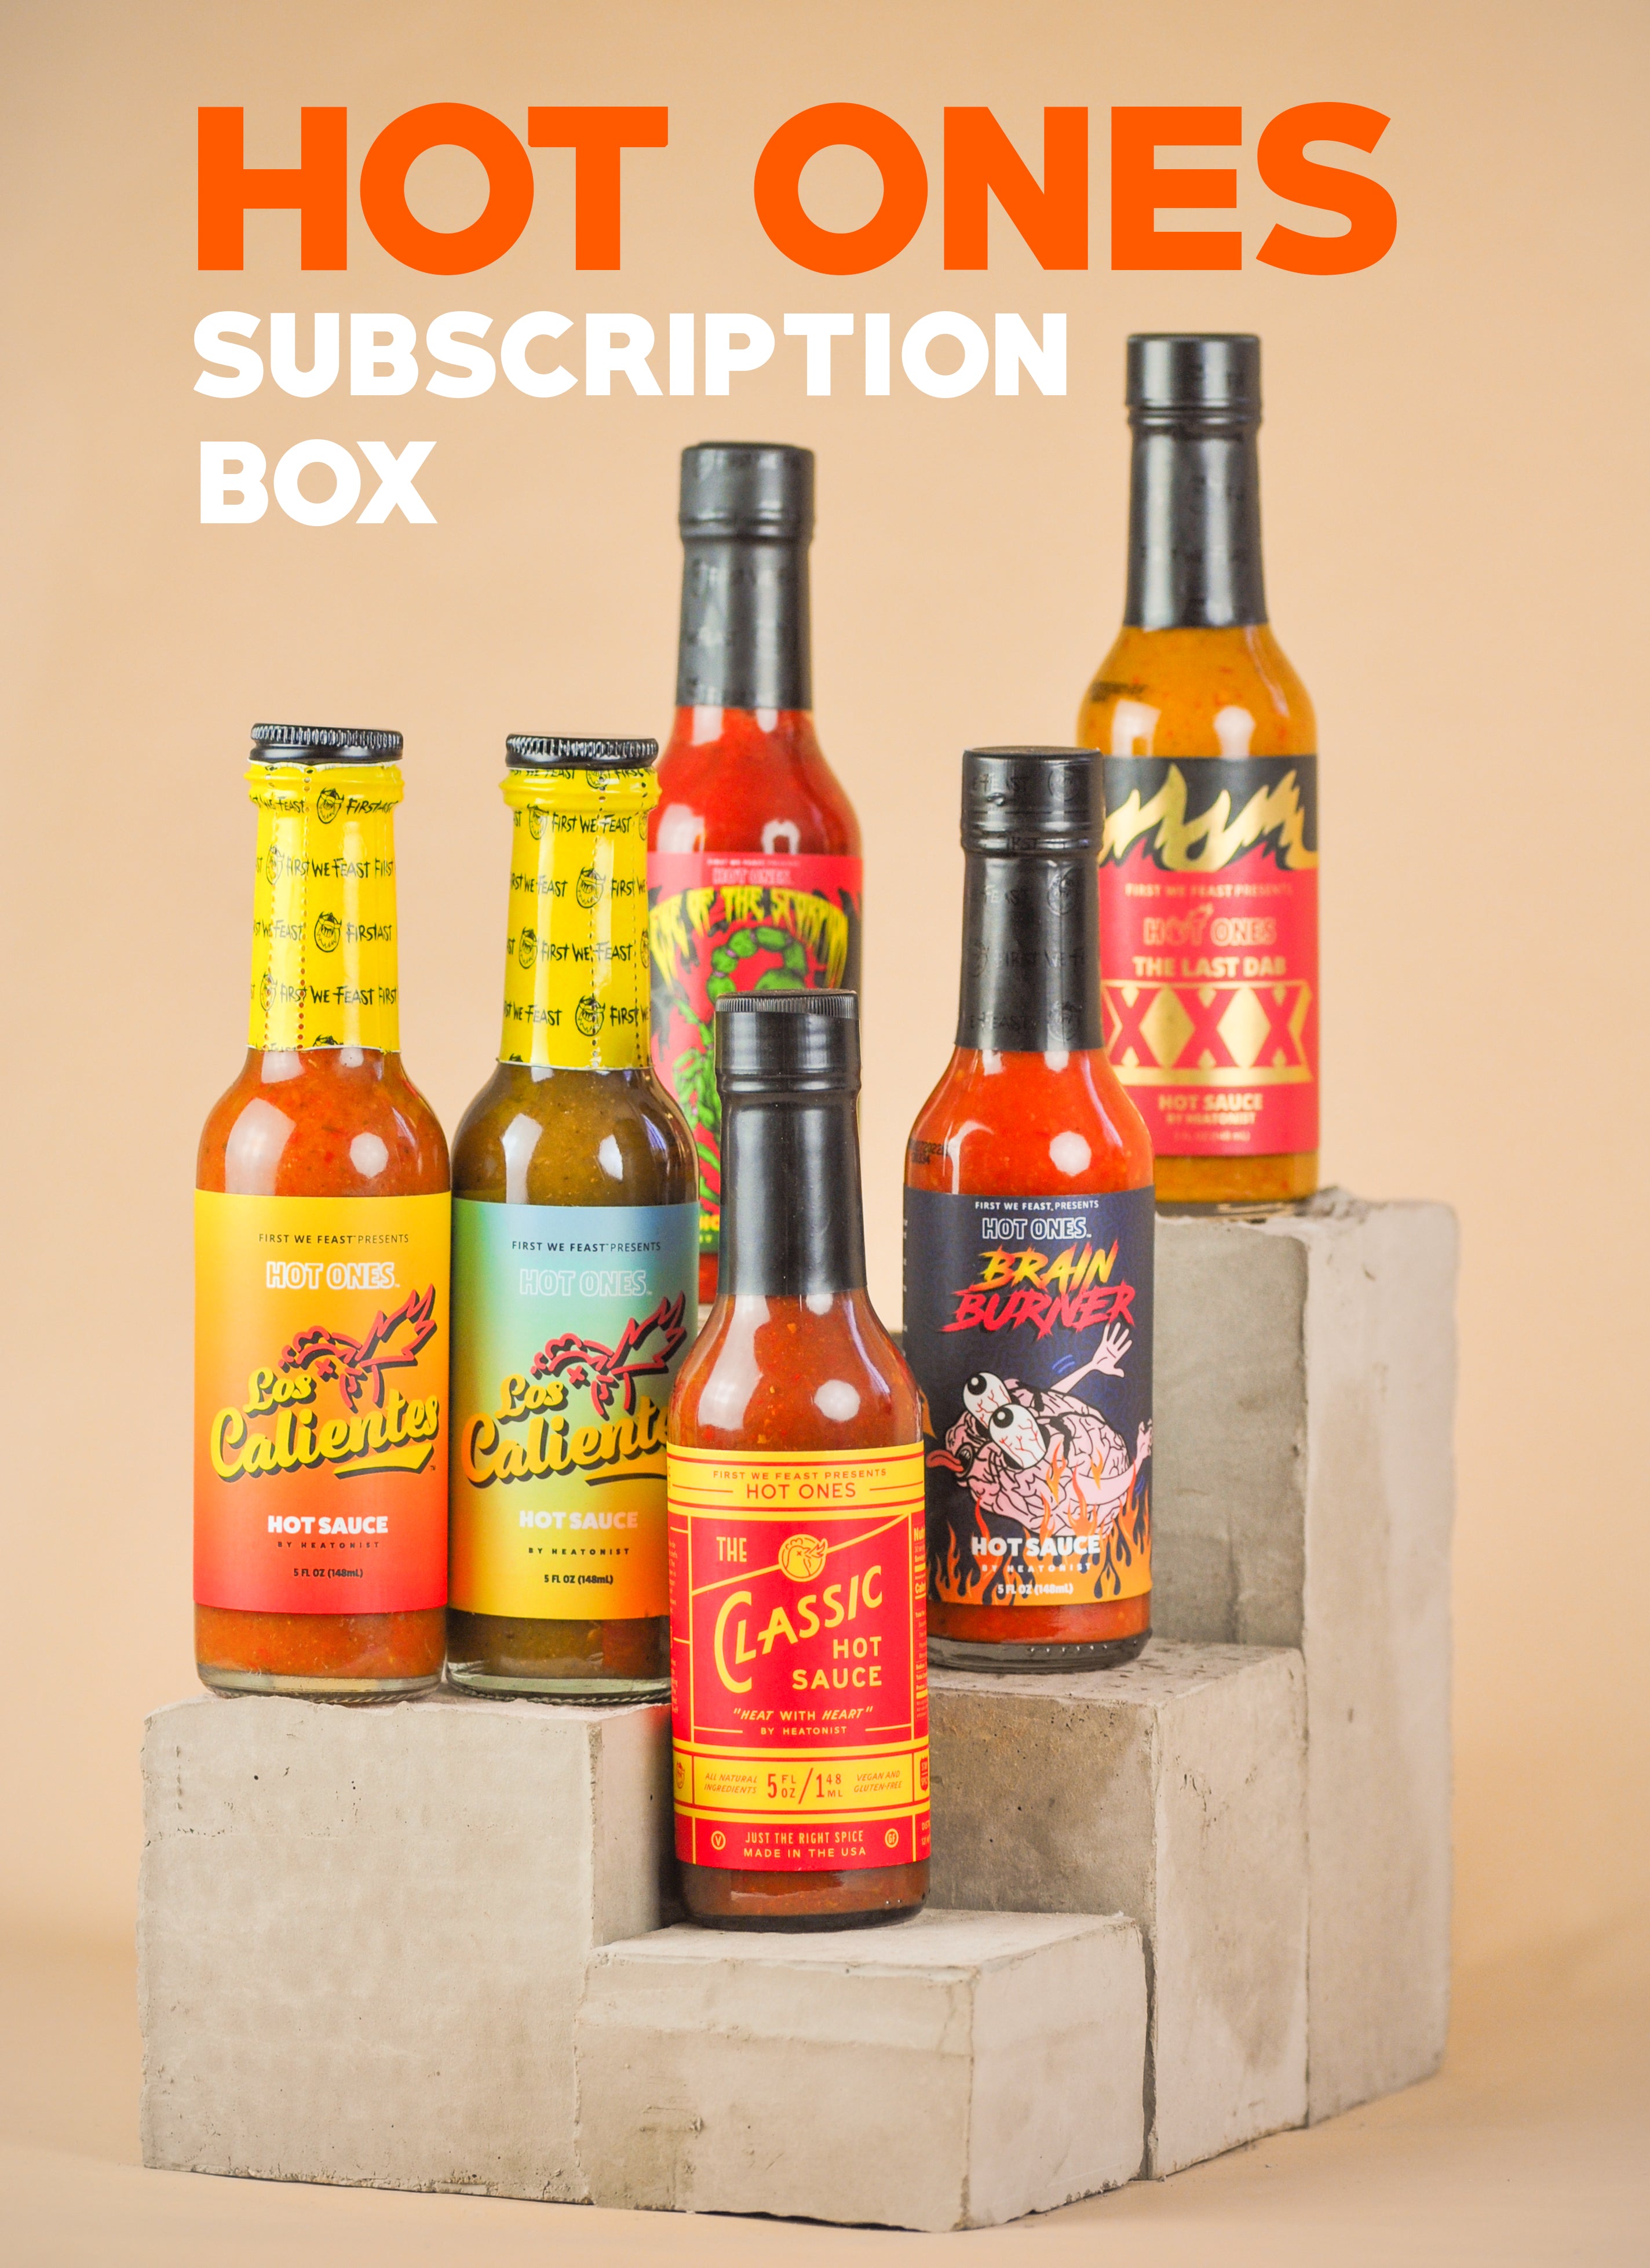 About the Hot Ones Hot Sauce Subscription Box HEATONIST